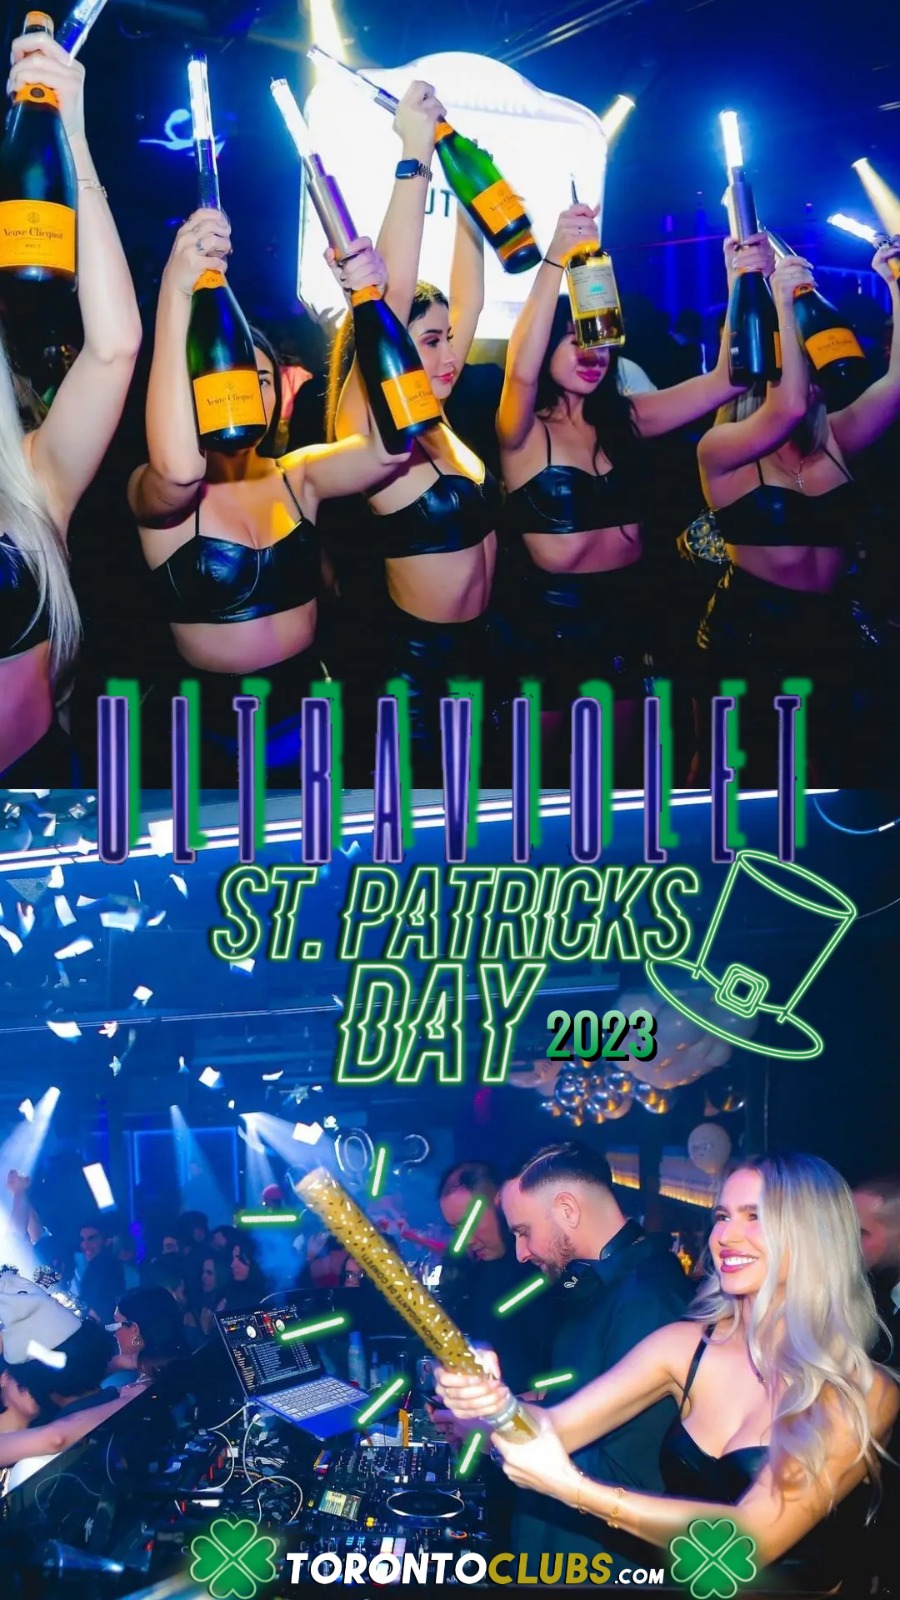 Toronto Clubs  TORONTO ST. PATRICK'S DAY 2023 EVENTS & PARTIES